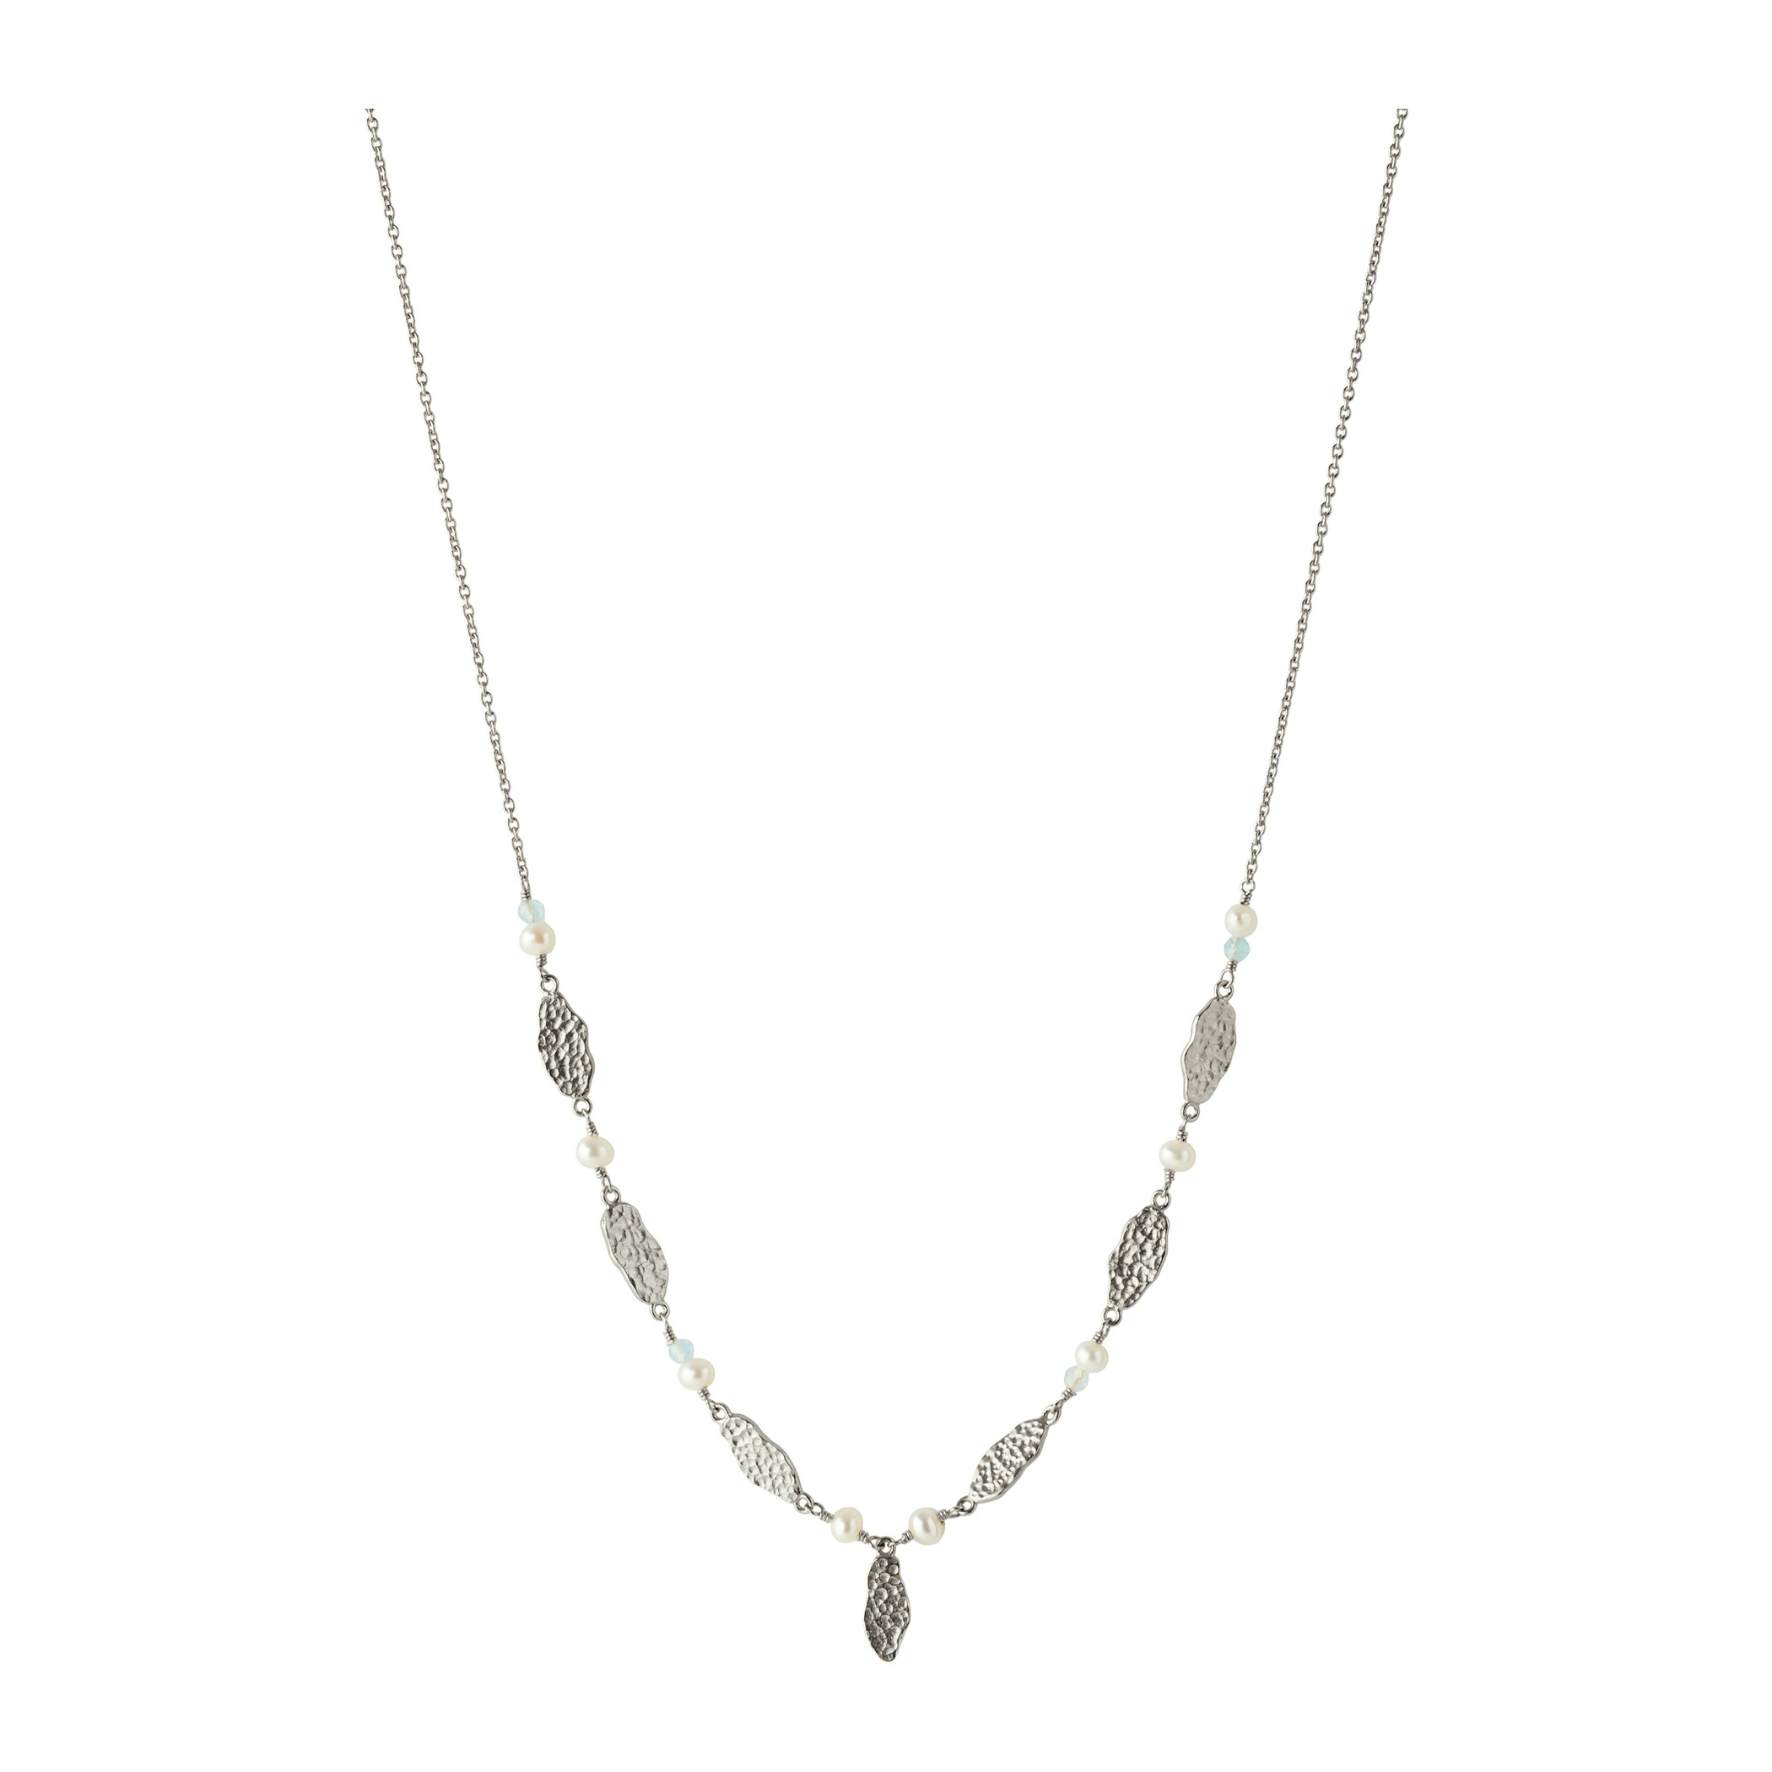 Drifting Dream Necklace von Pernille Corydon in Silber Sterling 925